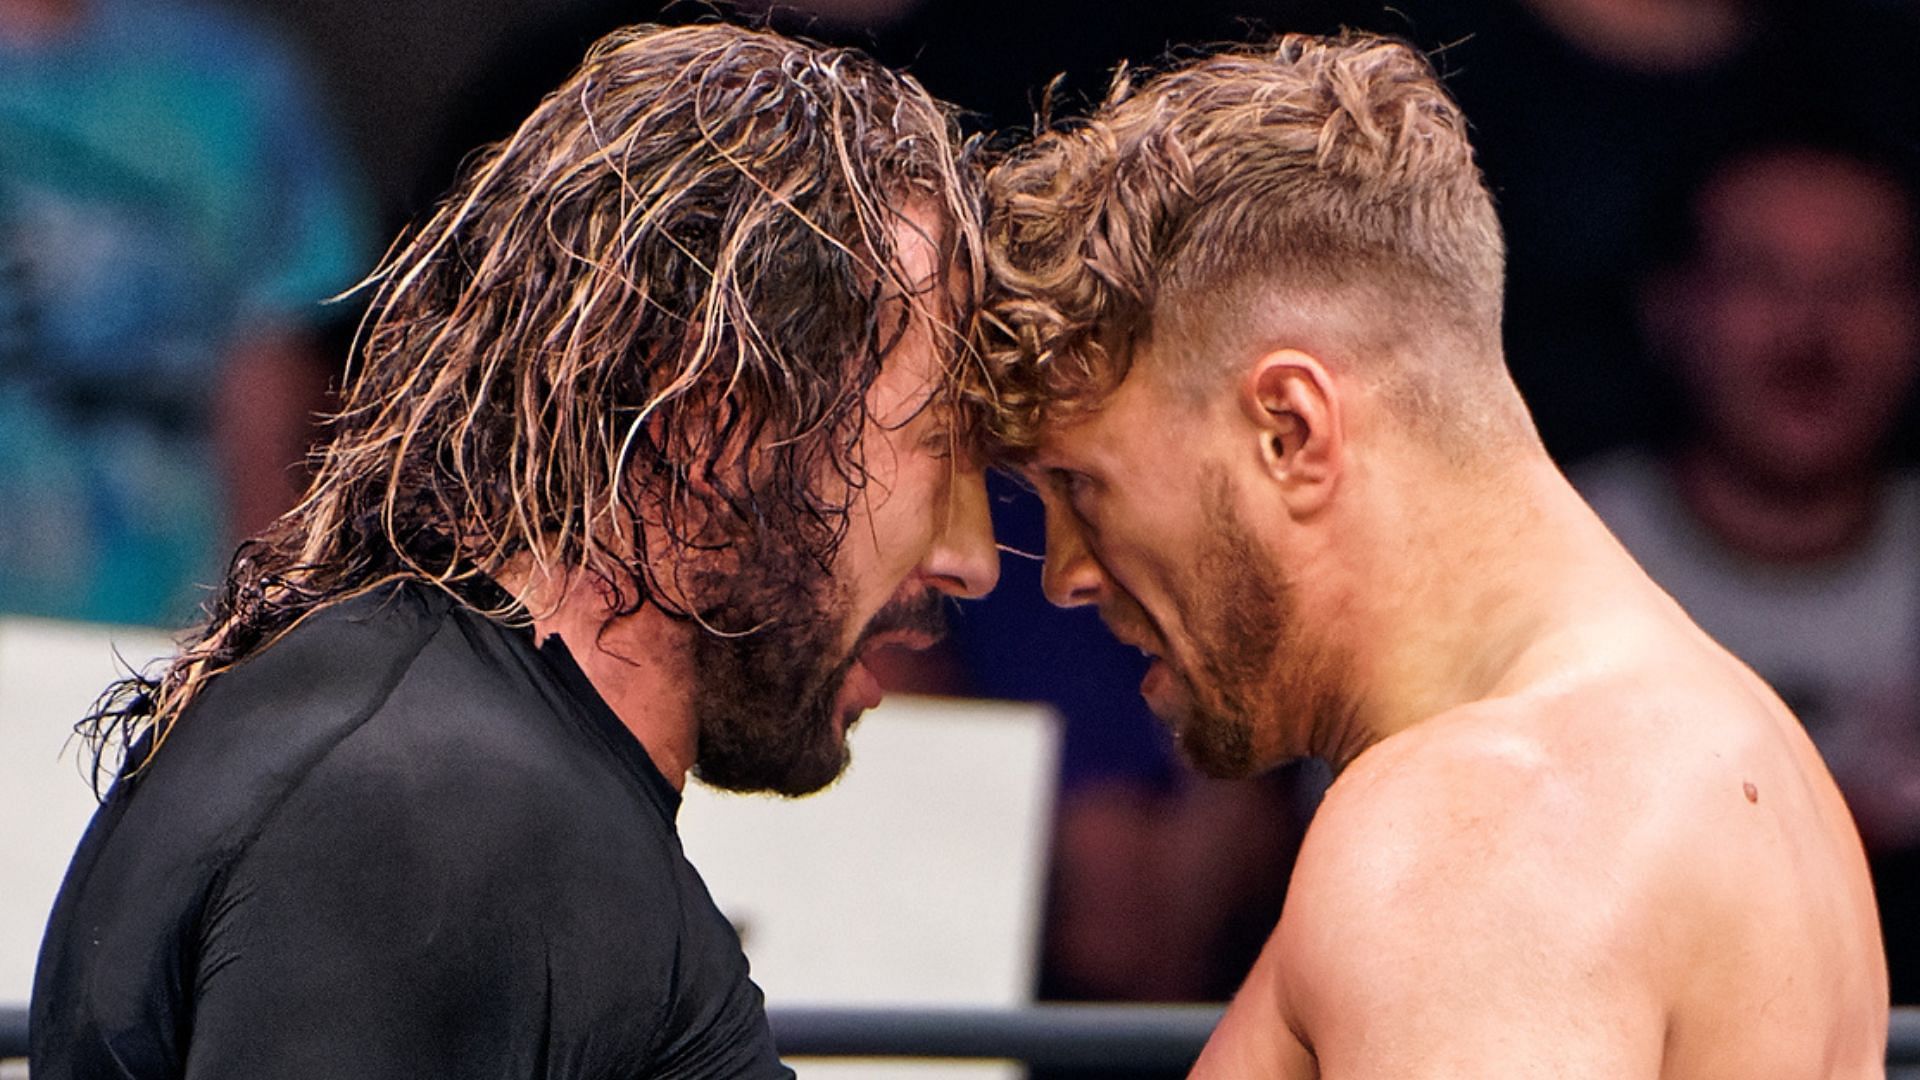 Kenny Omega and Will Ospreay pulled out some very dangerous moves